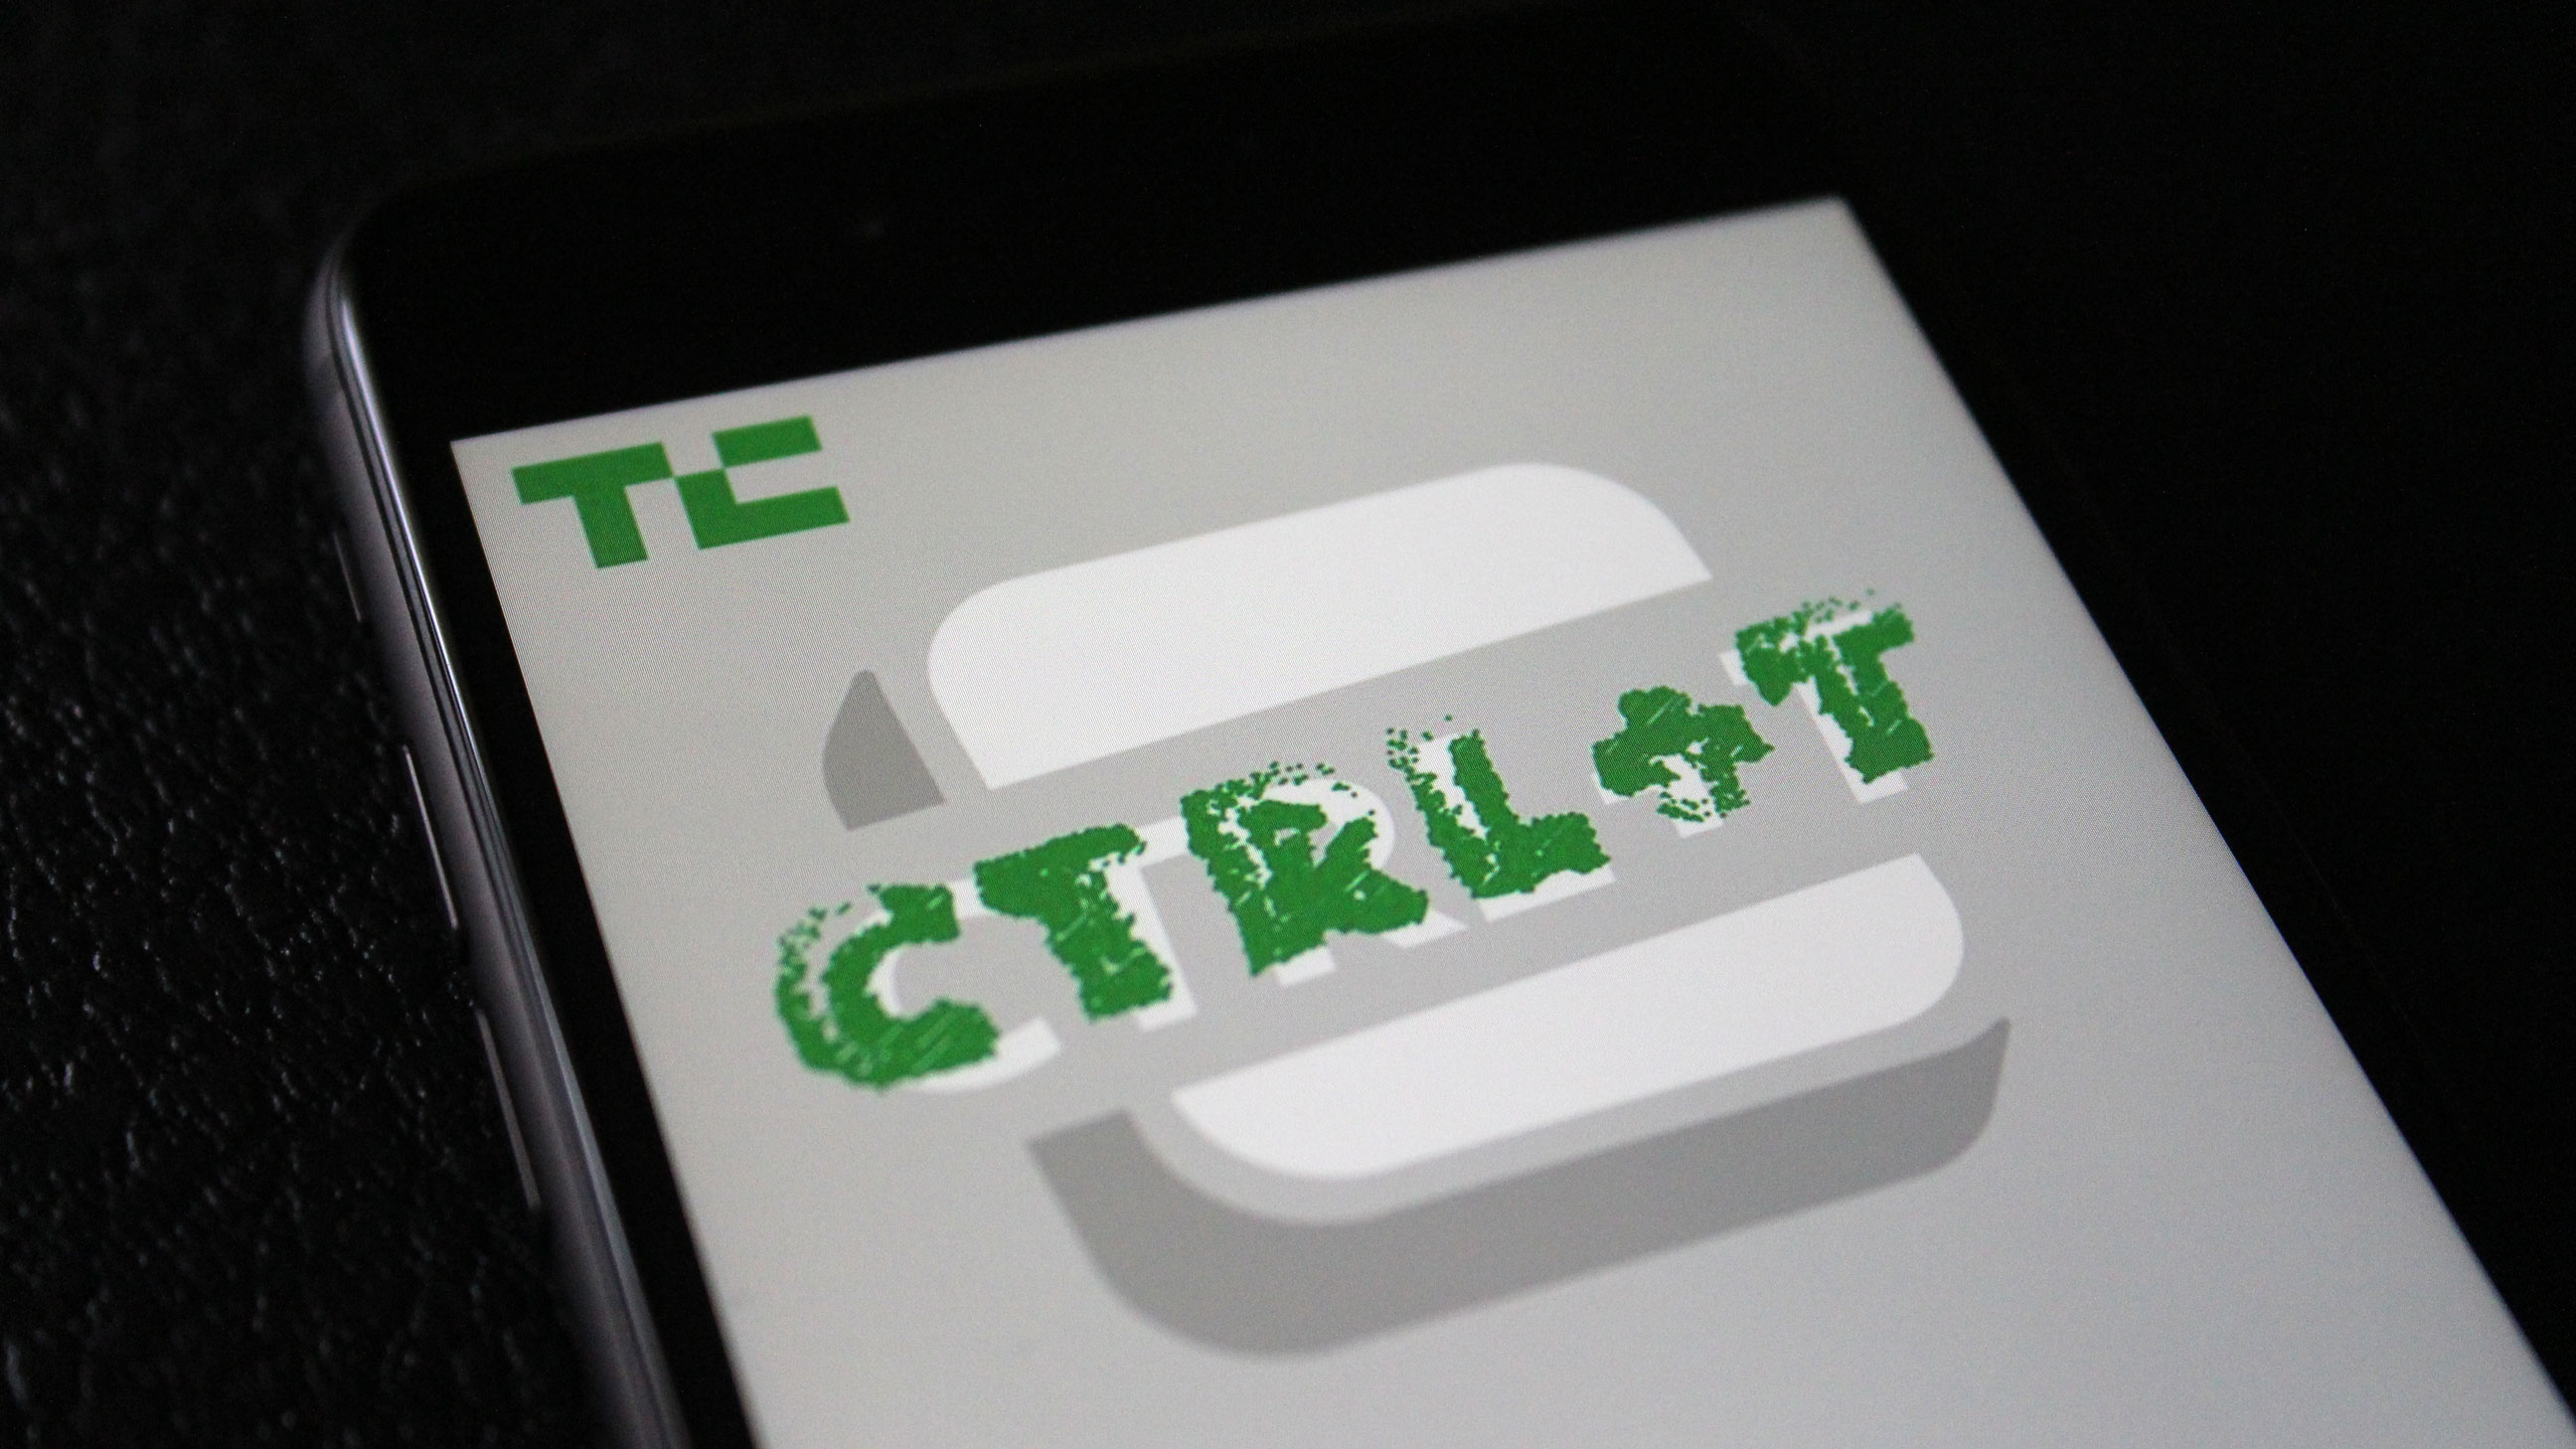 Welcome to CTRL+T, TechCrunch’s podcast about tech and culture